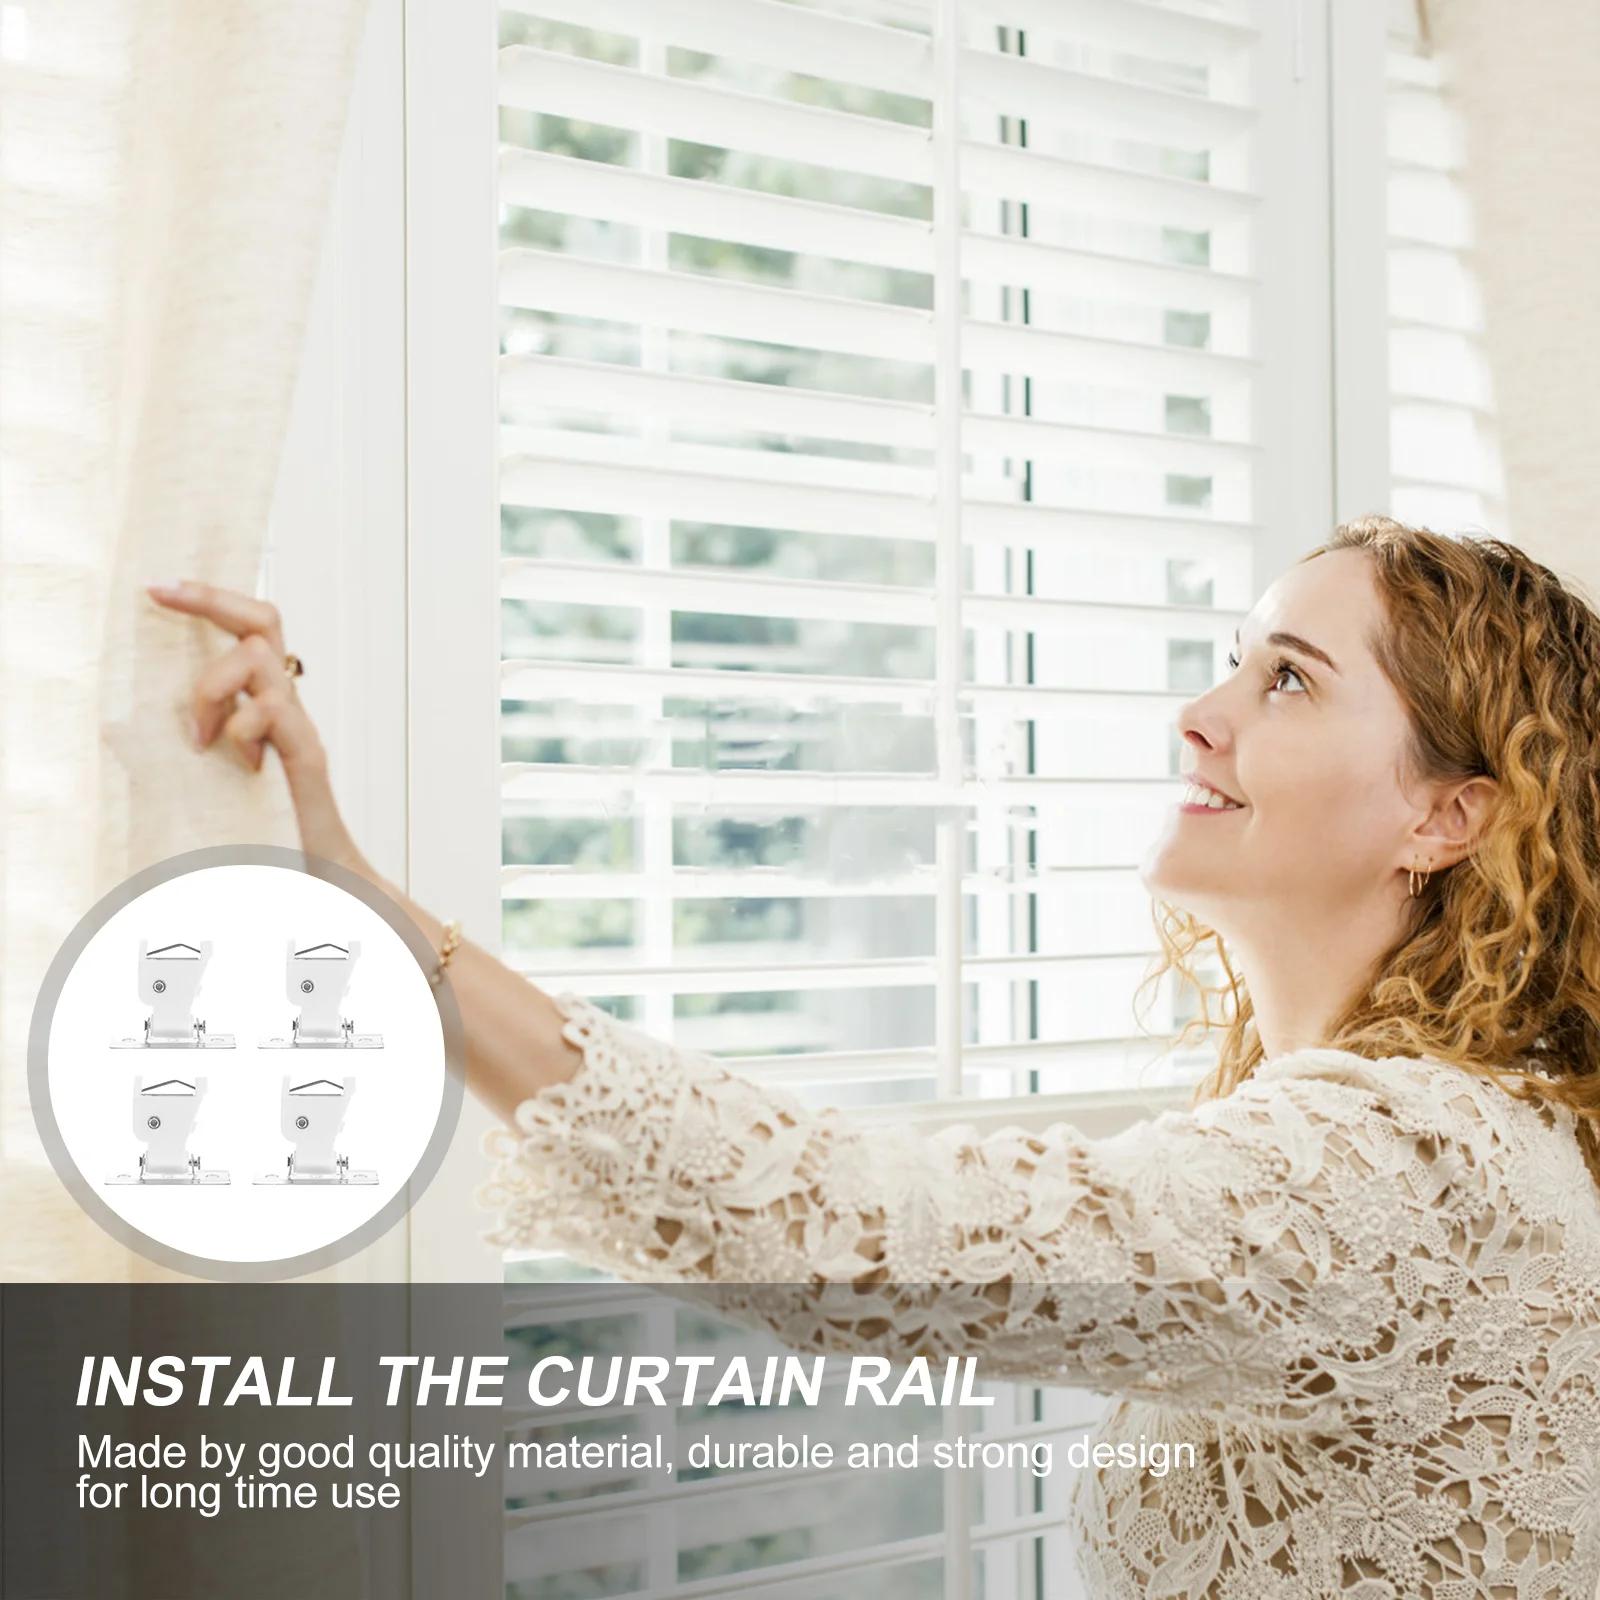 

Lock Cord Blind Roman Curtain Shade Draperypulley Mechanism Blinds Pleated Window Venetian Wire Accessories Small